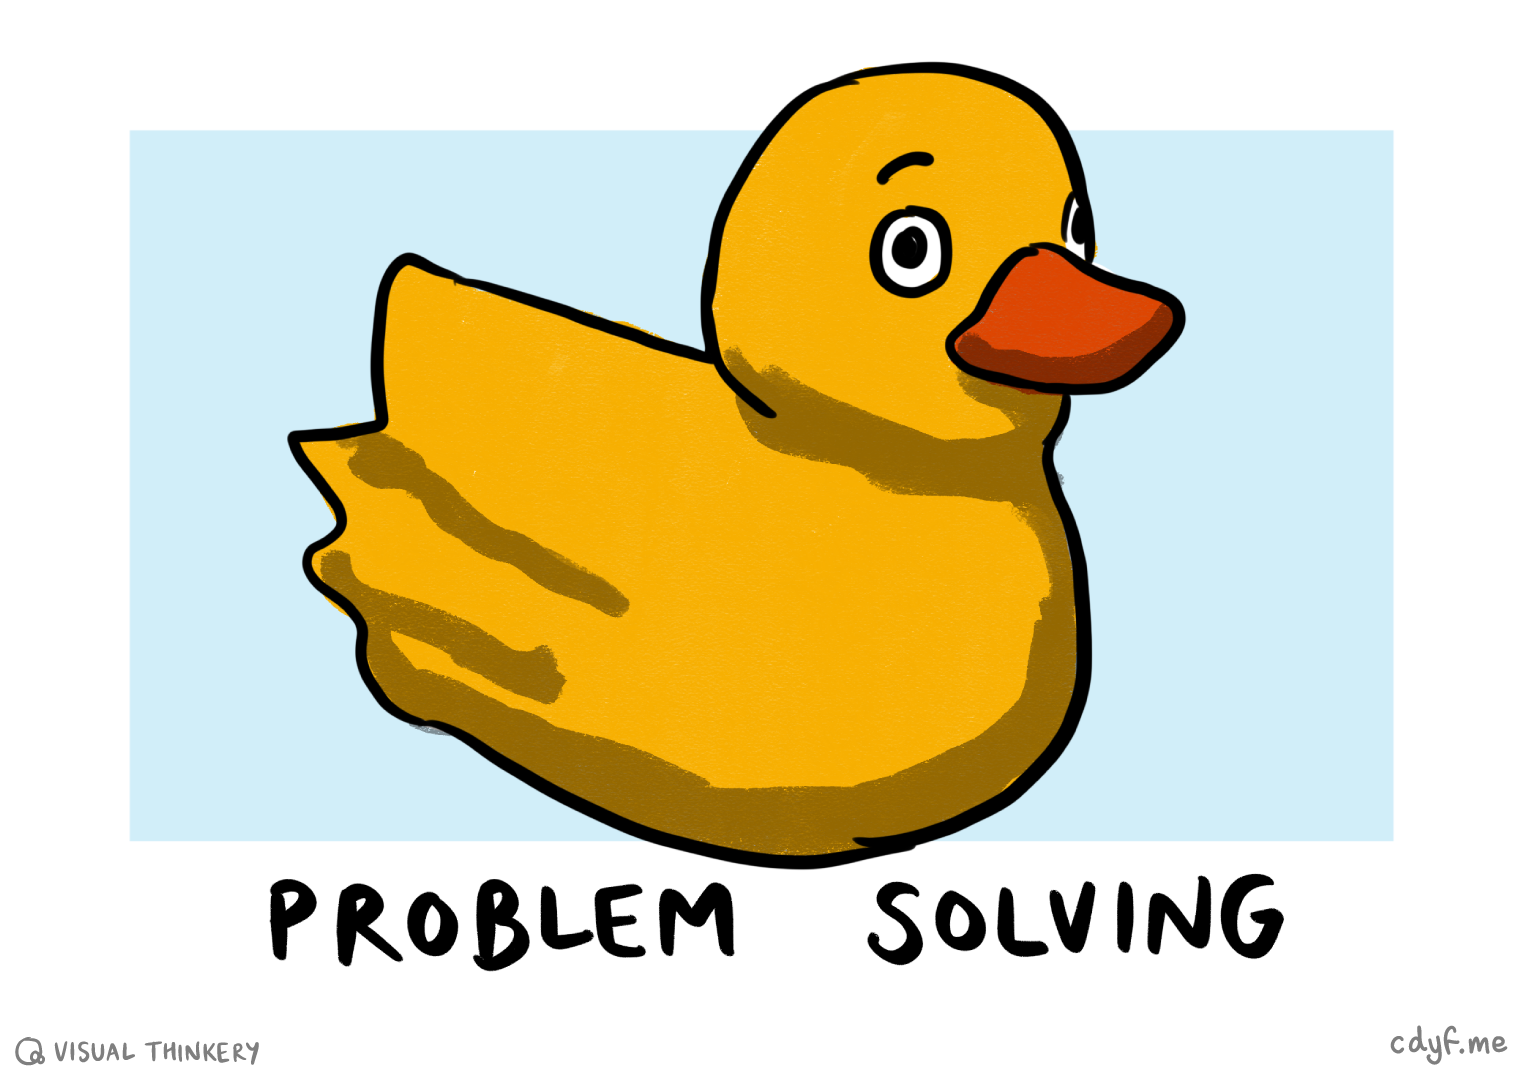 Ever tried explaining that troublesome bug to a rubber duck? Welcome to rubber duck debugging, a tried and tested technique for problem solving, either through written or spoken communication with an inanimate object. Rubber duck sketch by Visual Thinkery is licensed under CC-BY-ND